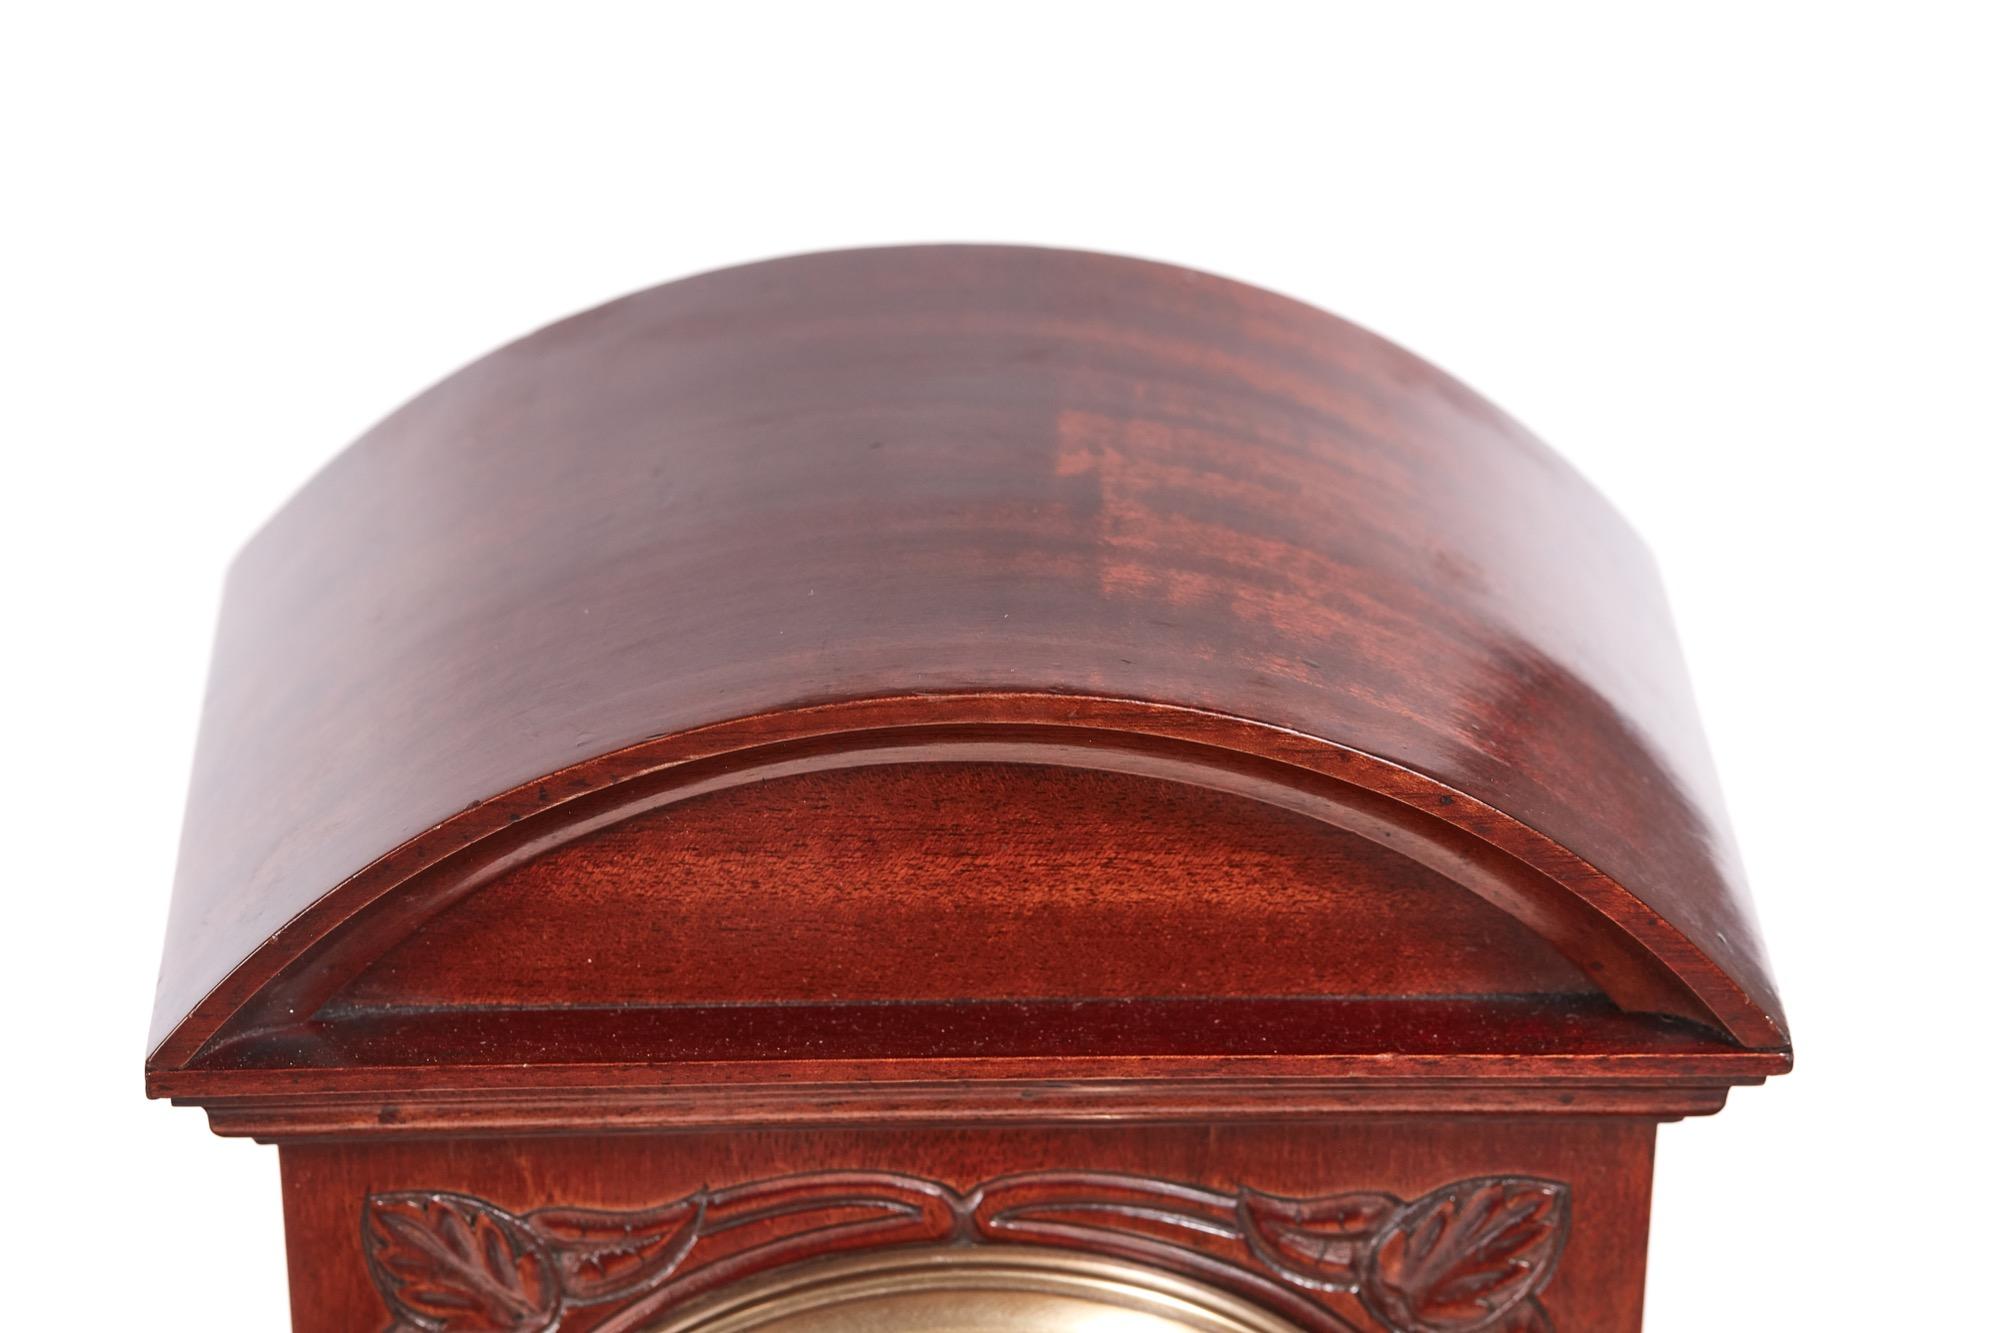 Edwardian carved mahogany mantel clock having an arch top and well carved mahogany case with a stepped base standing on brass ball feet. The enamel dial has a brass bezel and convex bevel edge glass, eight-day movement striking the hour and halves